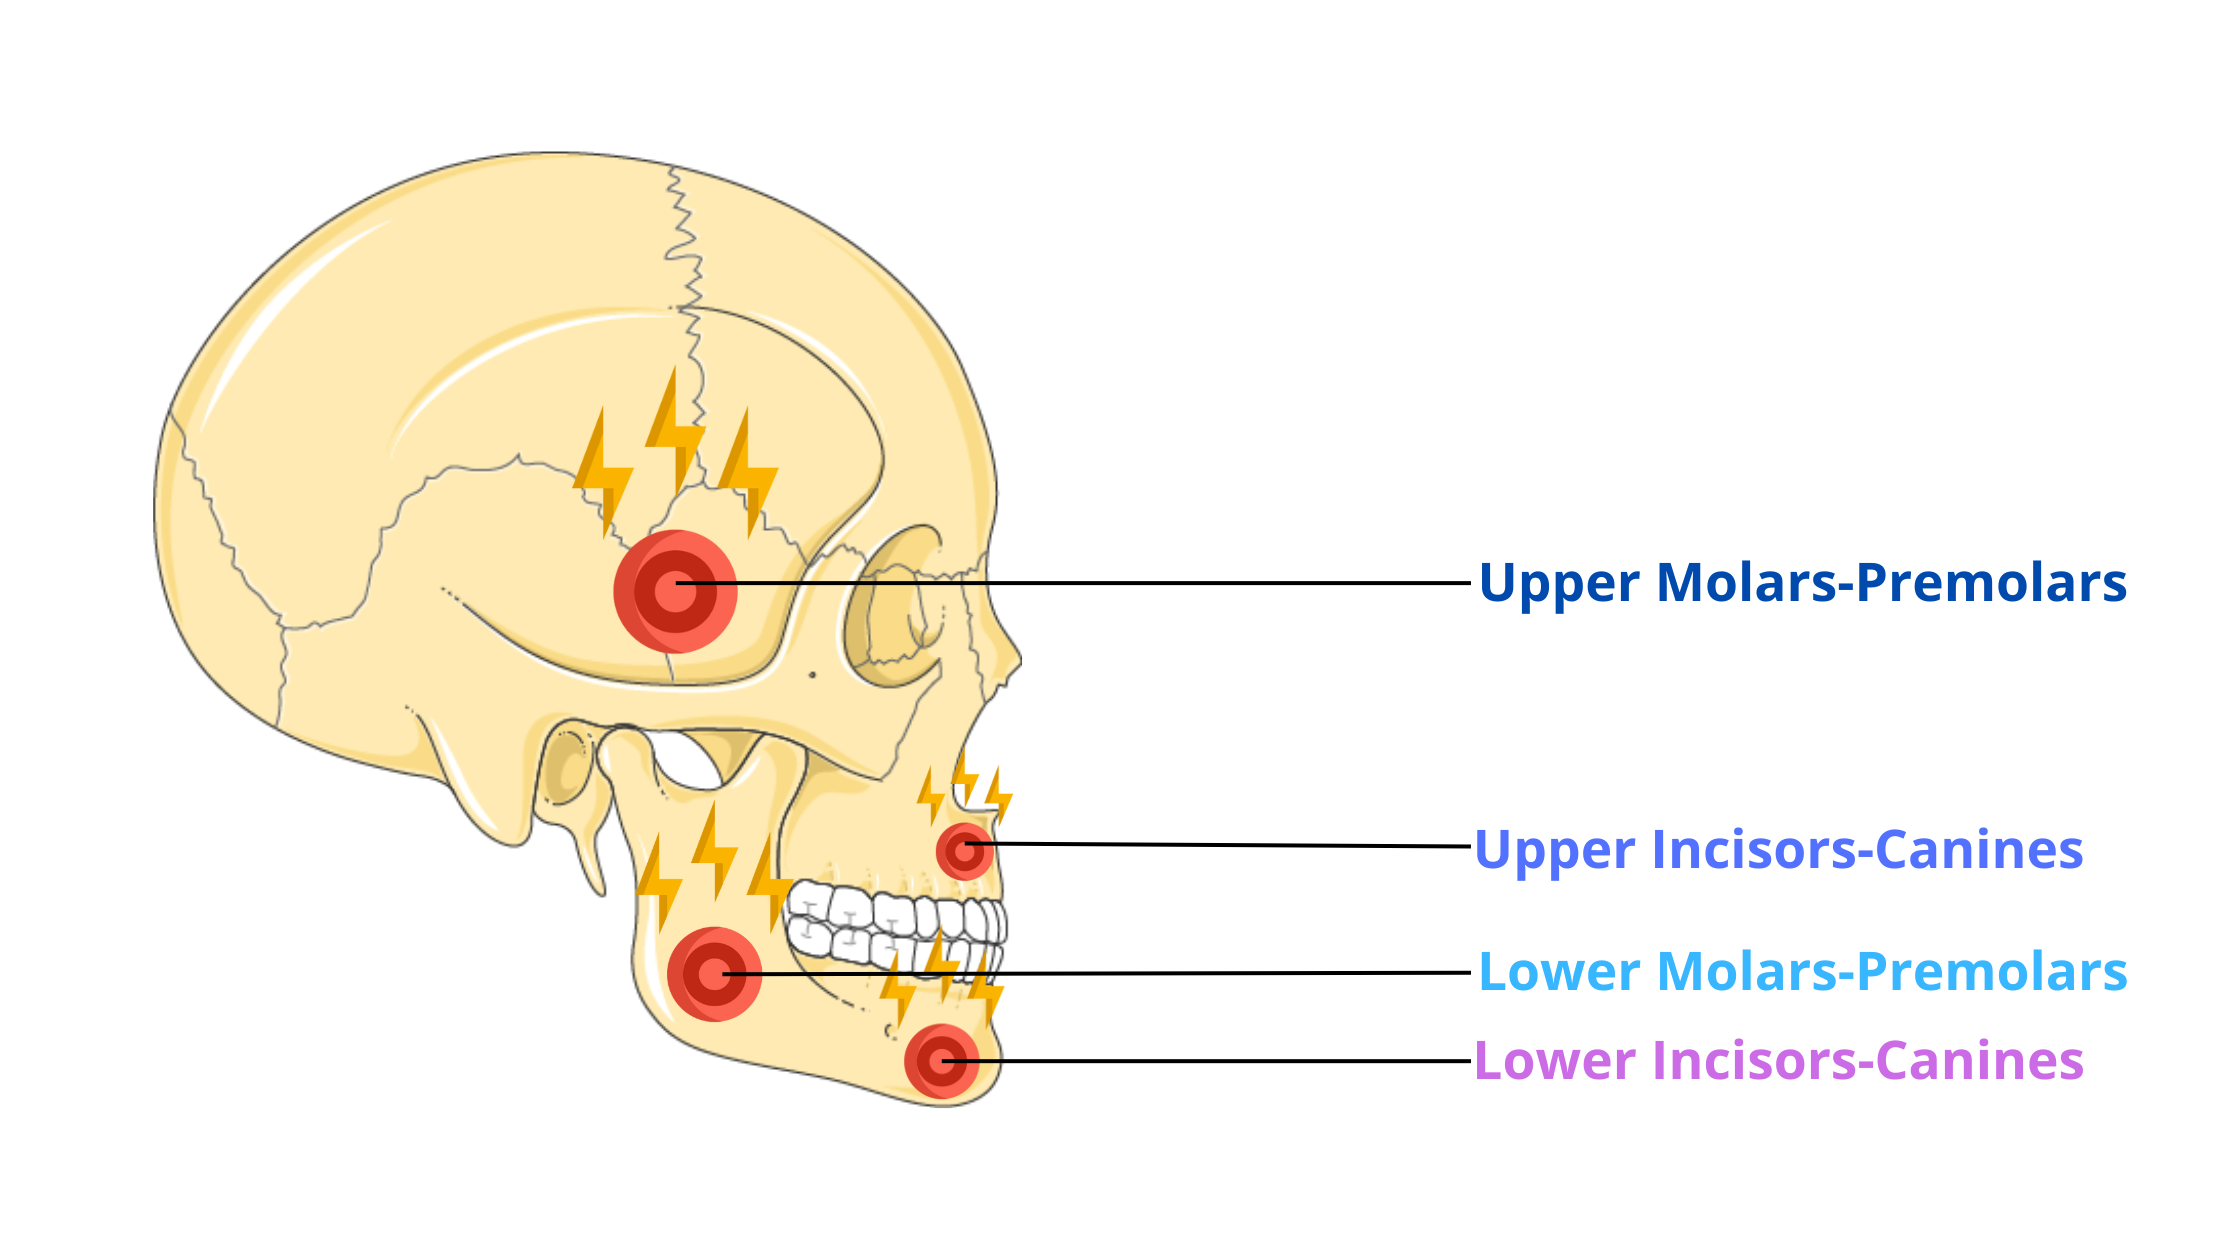 The location of jaw pain according to the type of infected tooth